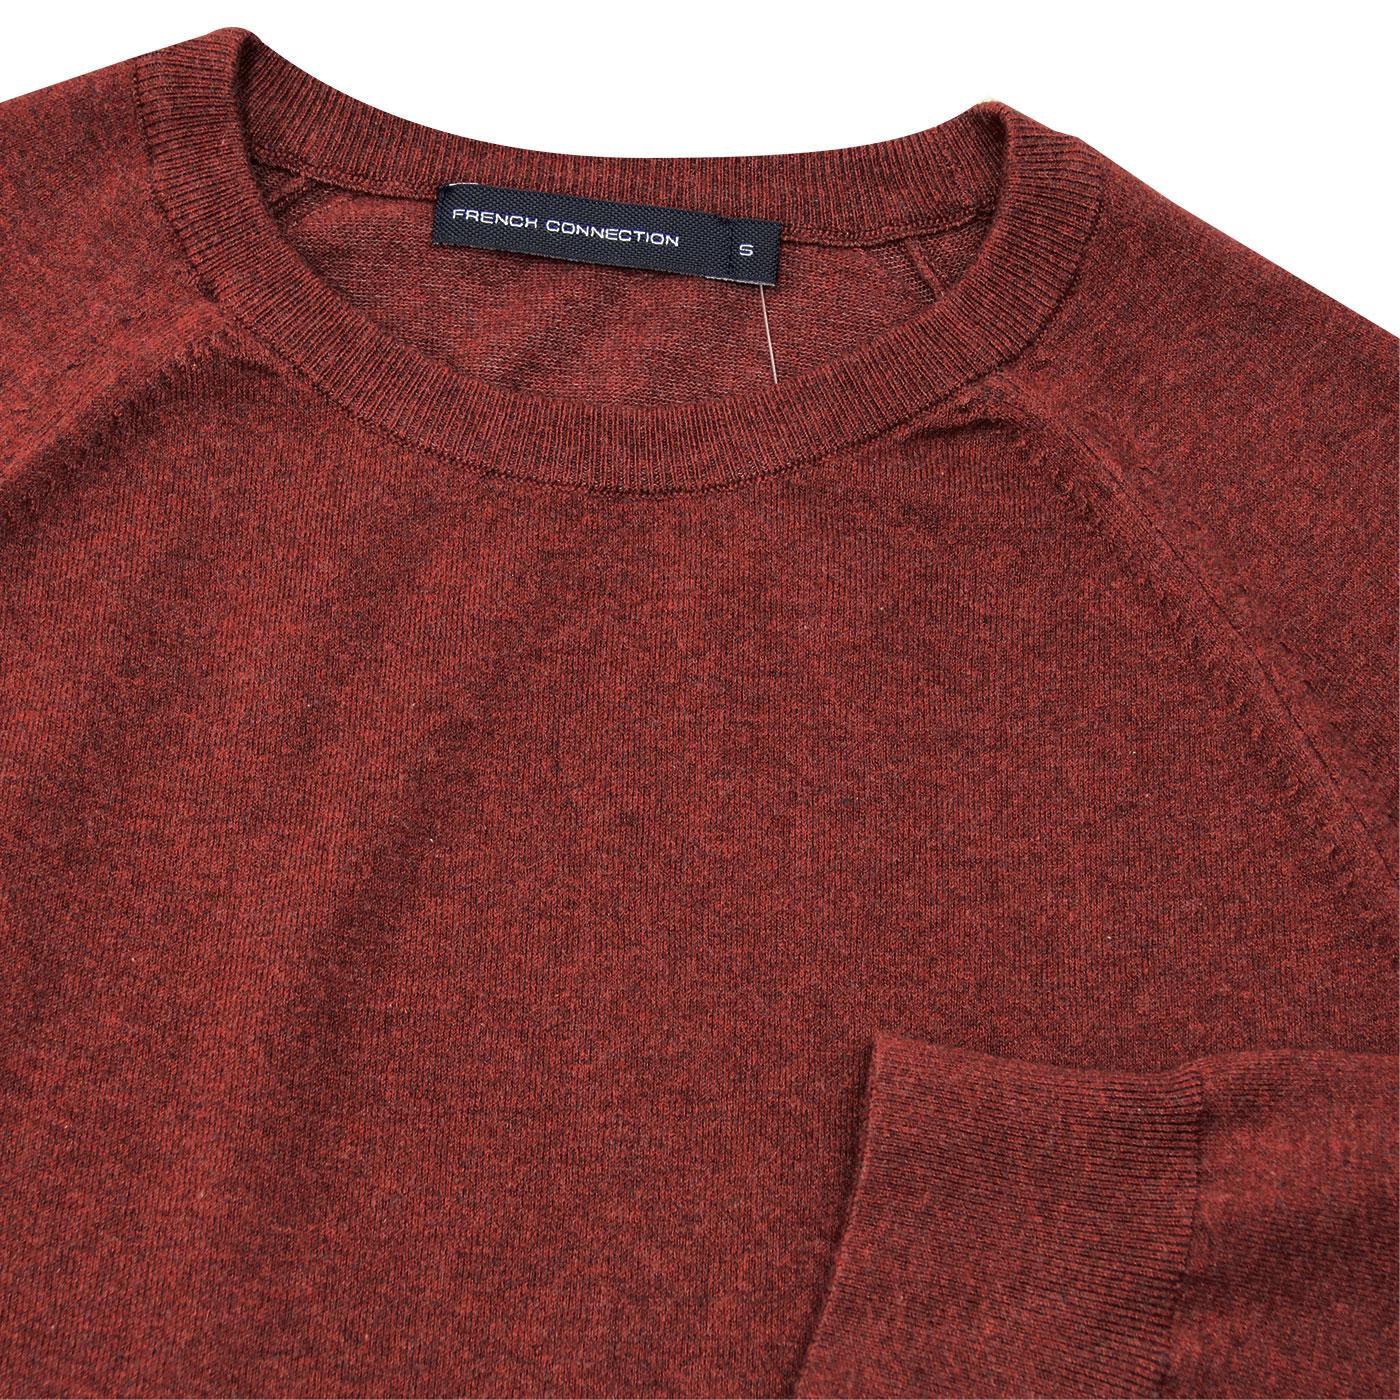 FRENCH CONNECTION Stretch Crew Neck Jumper Raspberry